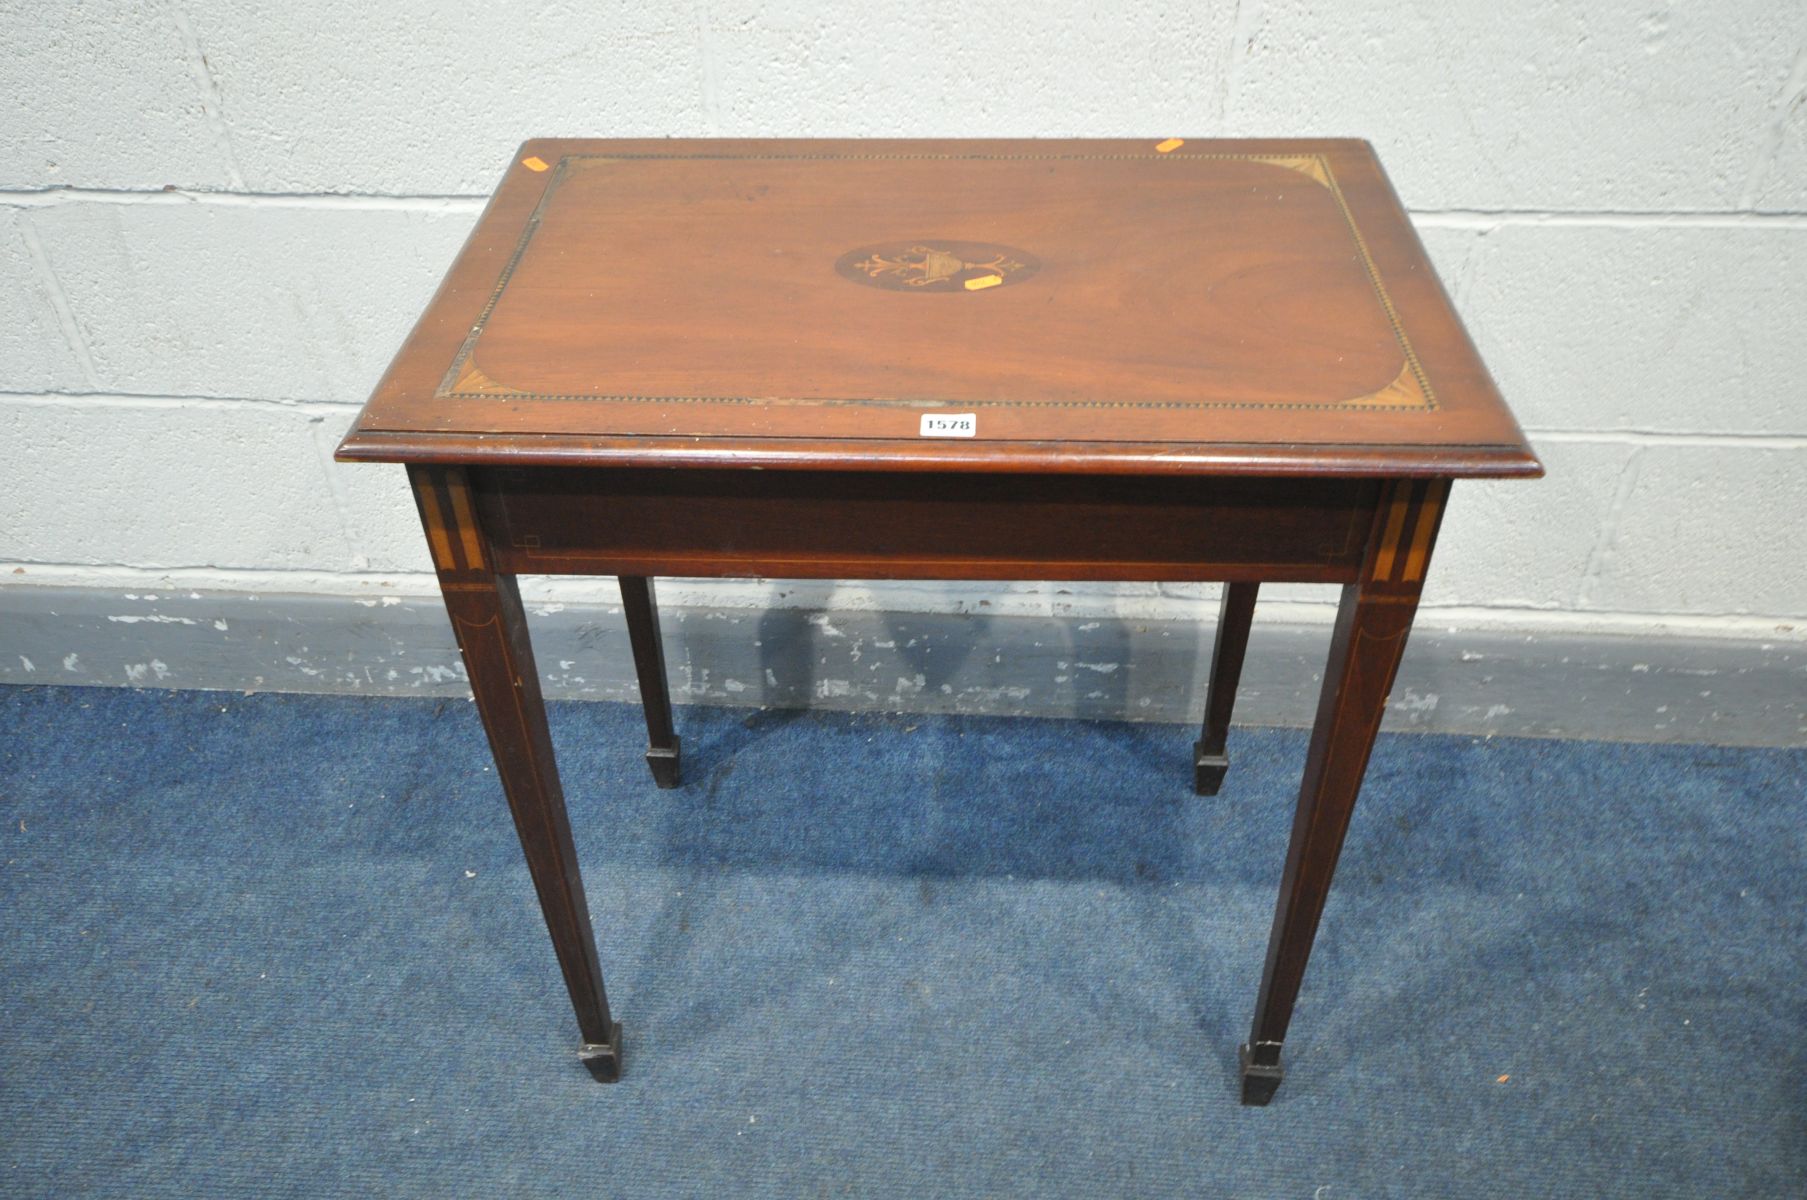 AN EDWARDIAN MAHOGANY AND INLAID RECTANGULAR SIDE TABLE, with a single drawer on square tapered legs